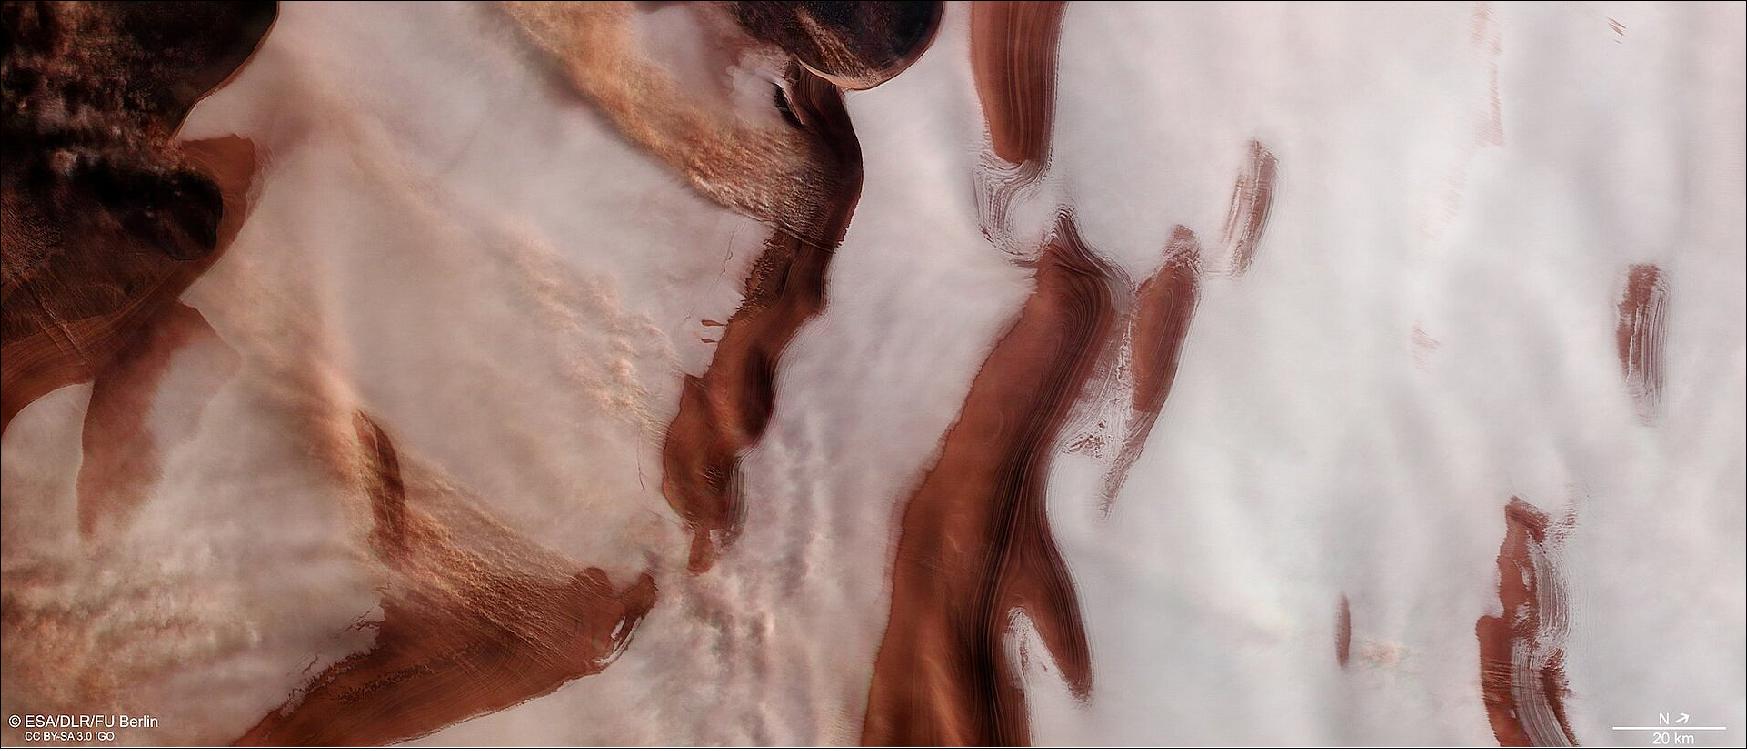 Figure 103: This image shows part of the ice cap sitting at Mars’ north pole, complete with bright swathes of ice, dark troughs and depressions, and signs of strong winds and stormy activity. The landscape here is a rippled mix of color. Dark red and ochre-hued troughs appear to cut through the icy white of the polar cap; these form part of a wider system of depressions that spiral outwards from the very center of the pole. Visible to the left of the frame are a few extended streams of clouds, aligned perpendicularly to a couple of the troughs. These are thought to be caused by small local storms that kick up dust into the martian atmosphere, eroding scarps and slopes as they do so and slowly changing the appearance of the troughs over time. - This image comprises data gathered on 16 November 2006 during orbit 3670. The ground resolution is approximately 15 m/pixel and the images are centered at about 244ºE/85ºN. This image was created using data from the nadir and color channels of the High Resolution Stereo Camera (HRSC). The nadir channel is aligned perpendicular to the surface of Mars, as if looking straight down at the surface. North is to the upper right (image credit: ESA/DLR/FU Berlin , CC BY-SA 3.0 IGO)